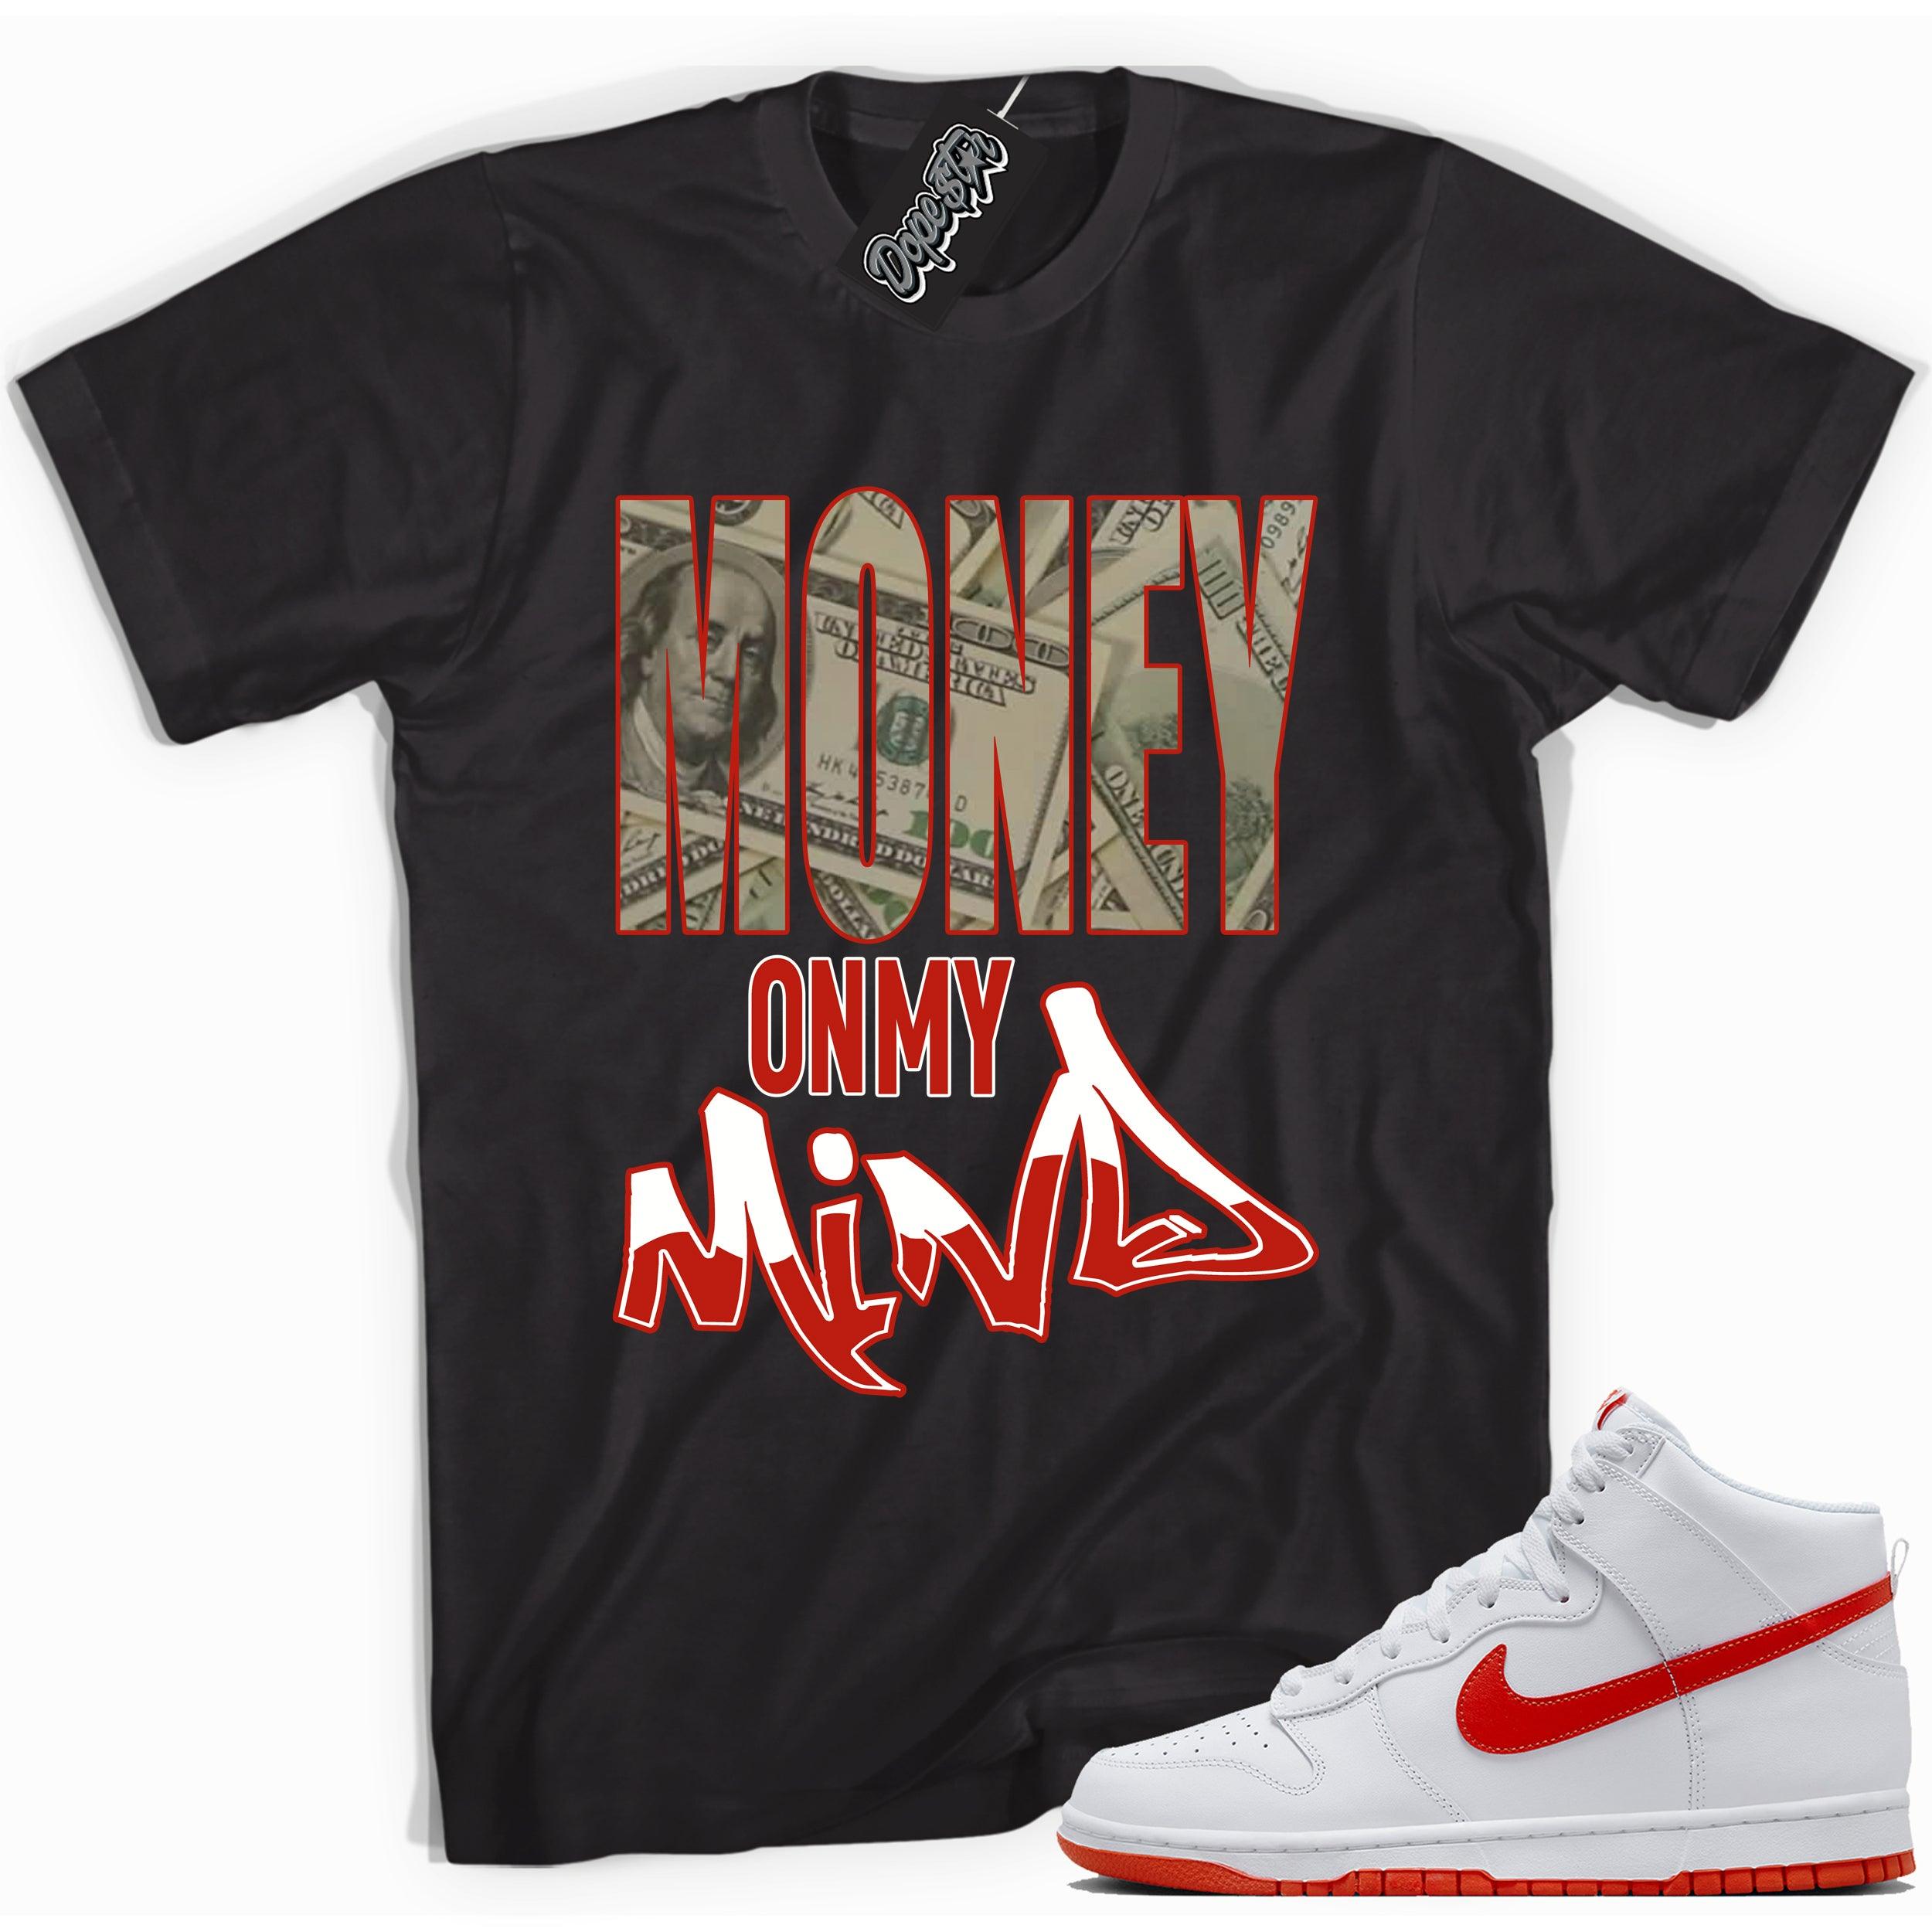 Cool black graphic tee with 'money on my mind' print, that perfectly matches Nike Dunk High White Picante Red sneakers.